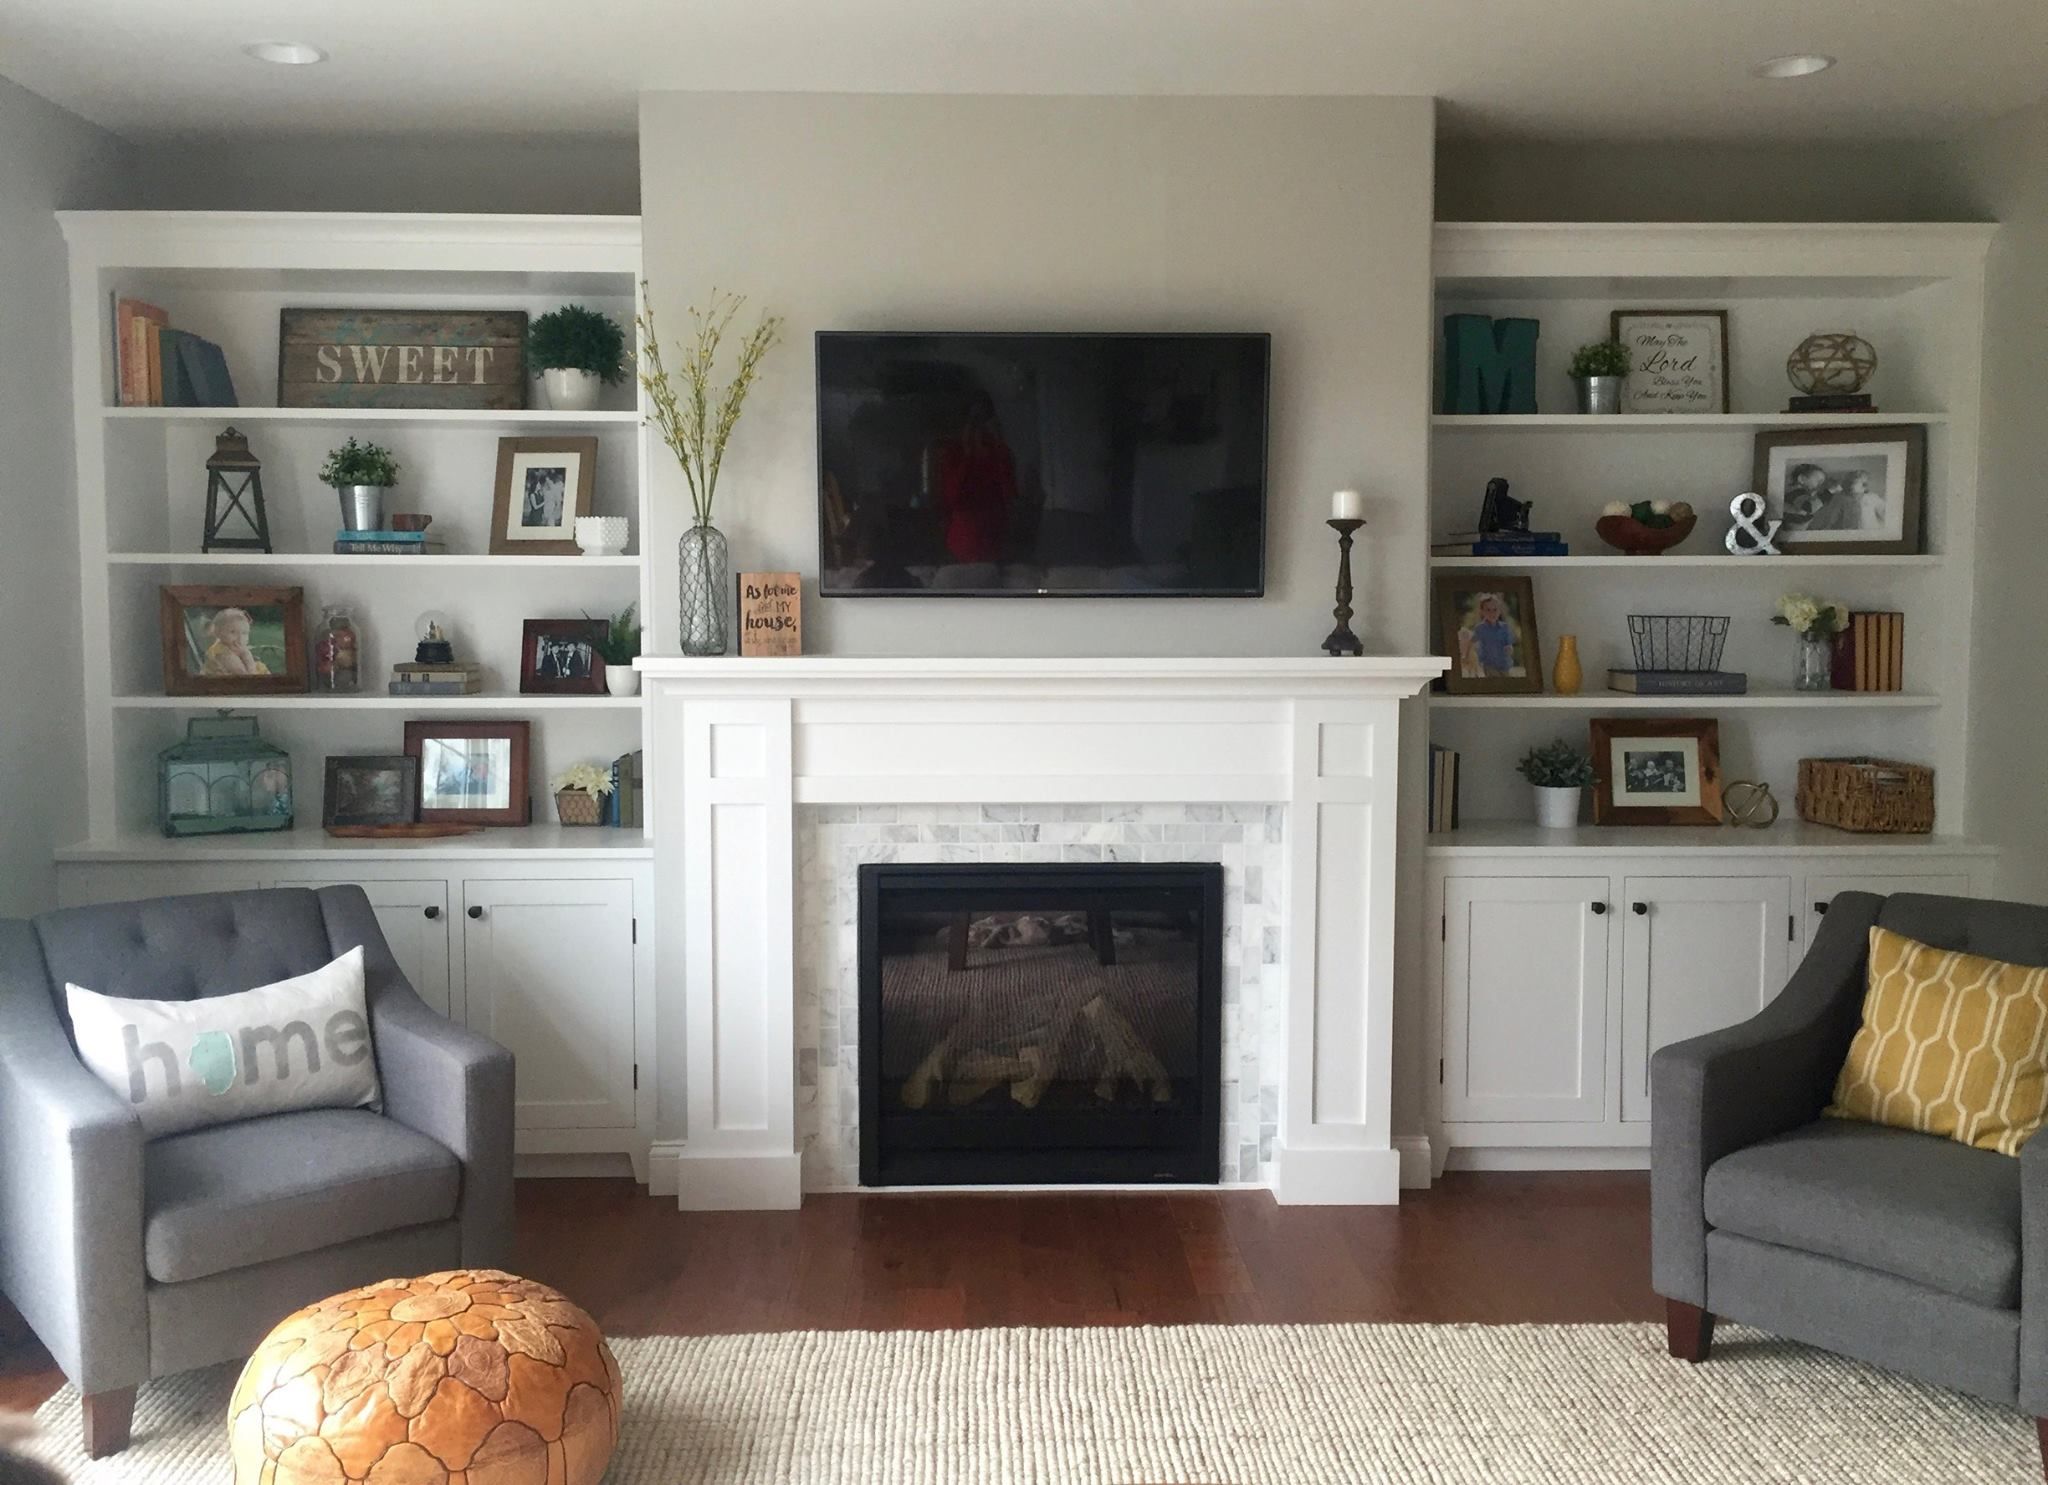 Fireplace Surround Cabinets Best Of How to Build A Built In the Cabinets Woodworking